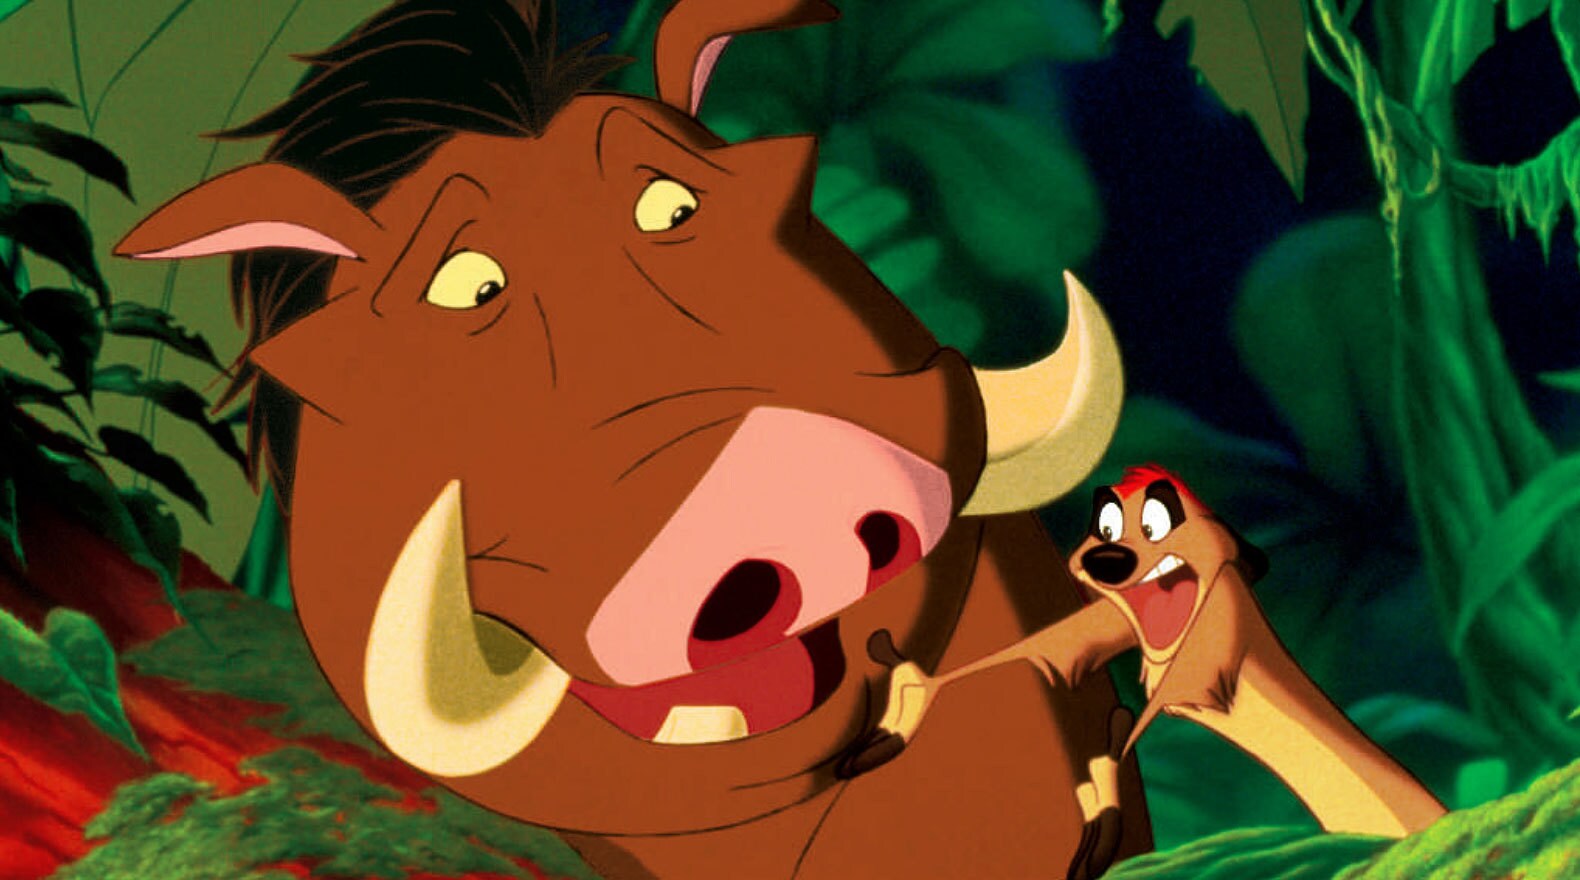 Timon warns Pumbaa about what will happen when Nala and Simba fall in love.